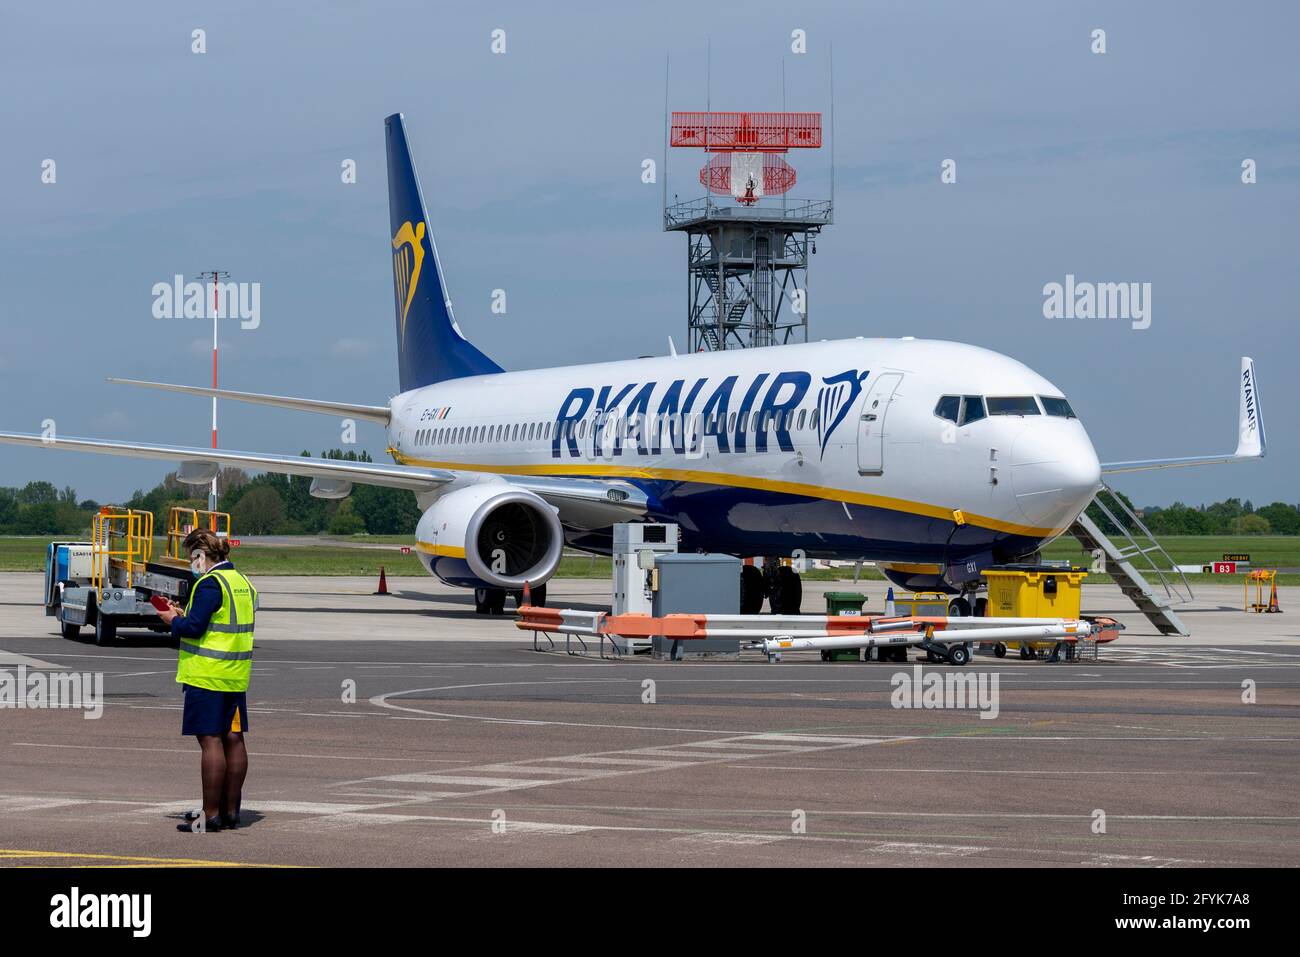 Ryanair Boeing 737 jet airliner plane on stand at London Southend Airport, Essex, UK, ready for resumption of flights after COVID 19 cessation Stock Photo